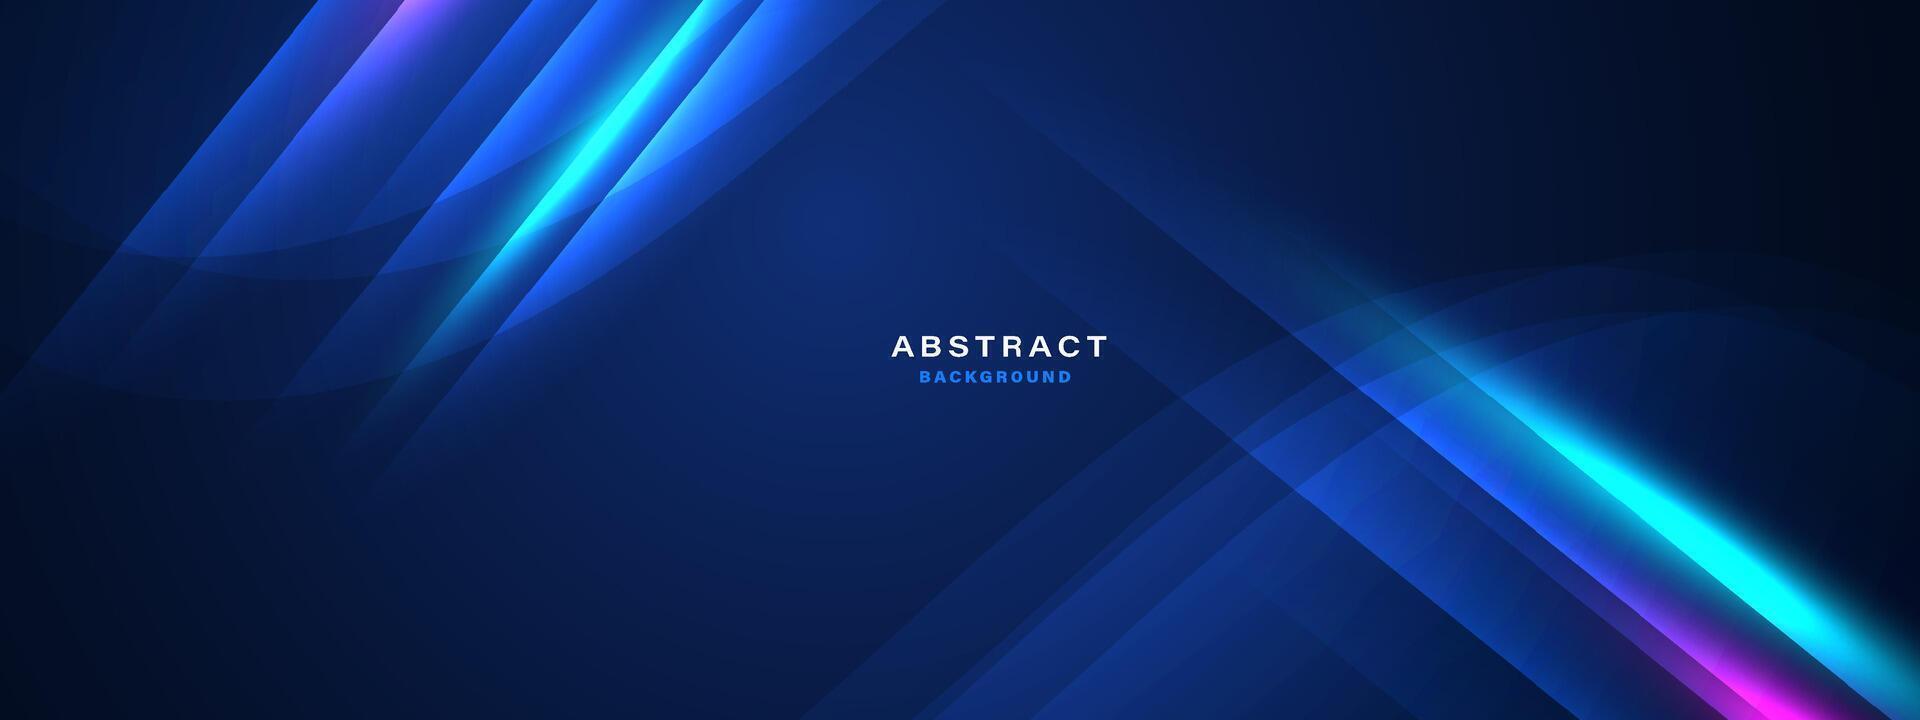 Abstract futuristic blue background with glowing light effect vector